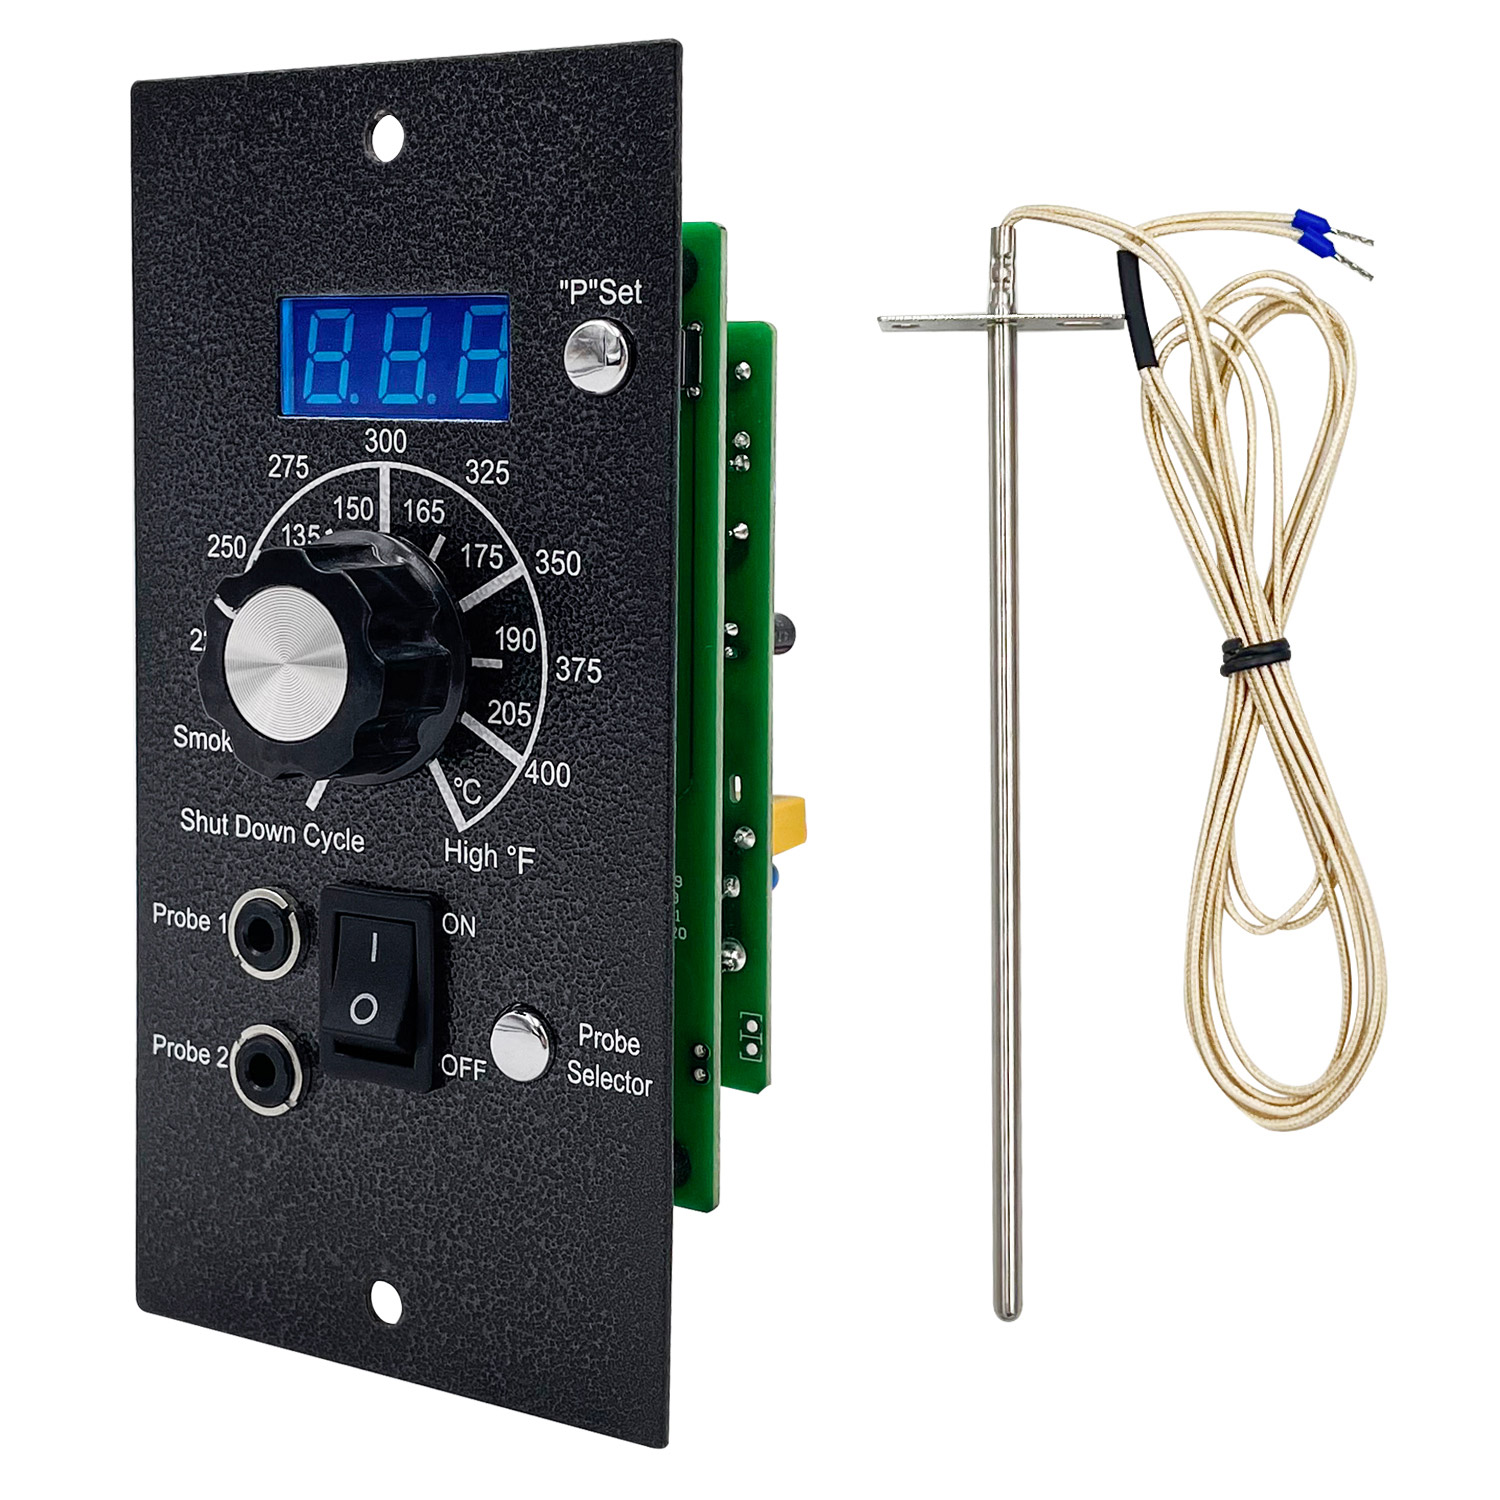 Digital Control Board for Traeger Grill with RTD Probe